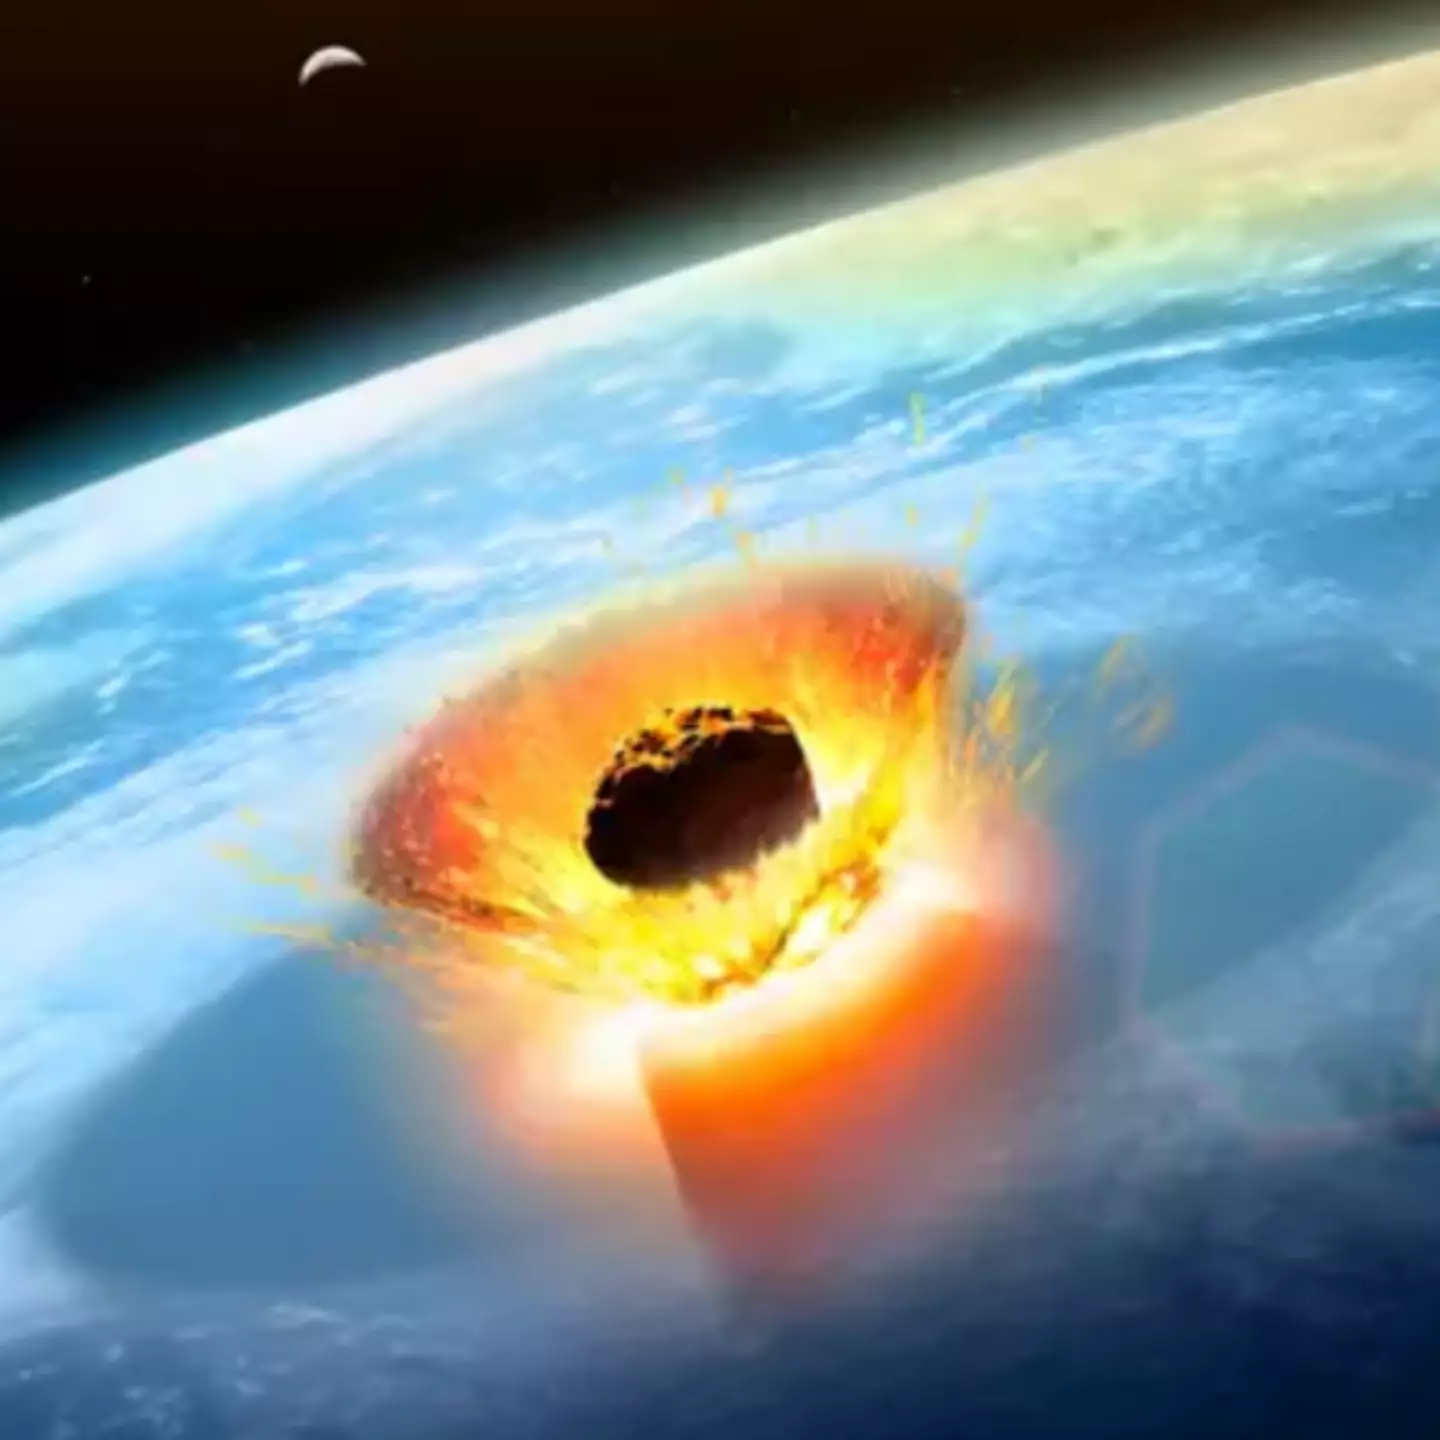 Scientists have updated the chance that devastating 'God of Chaos' asteroid will hit Earth